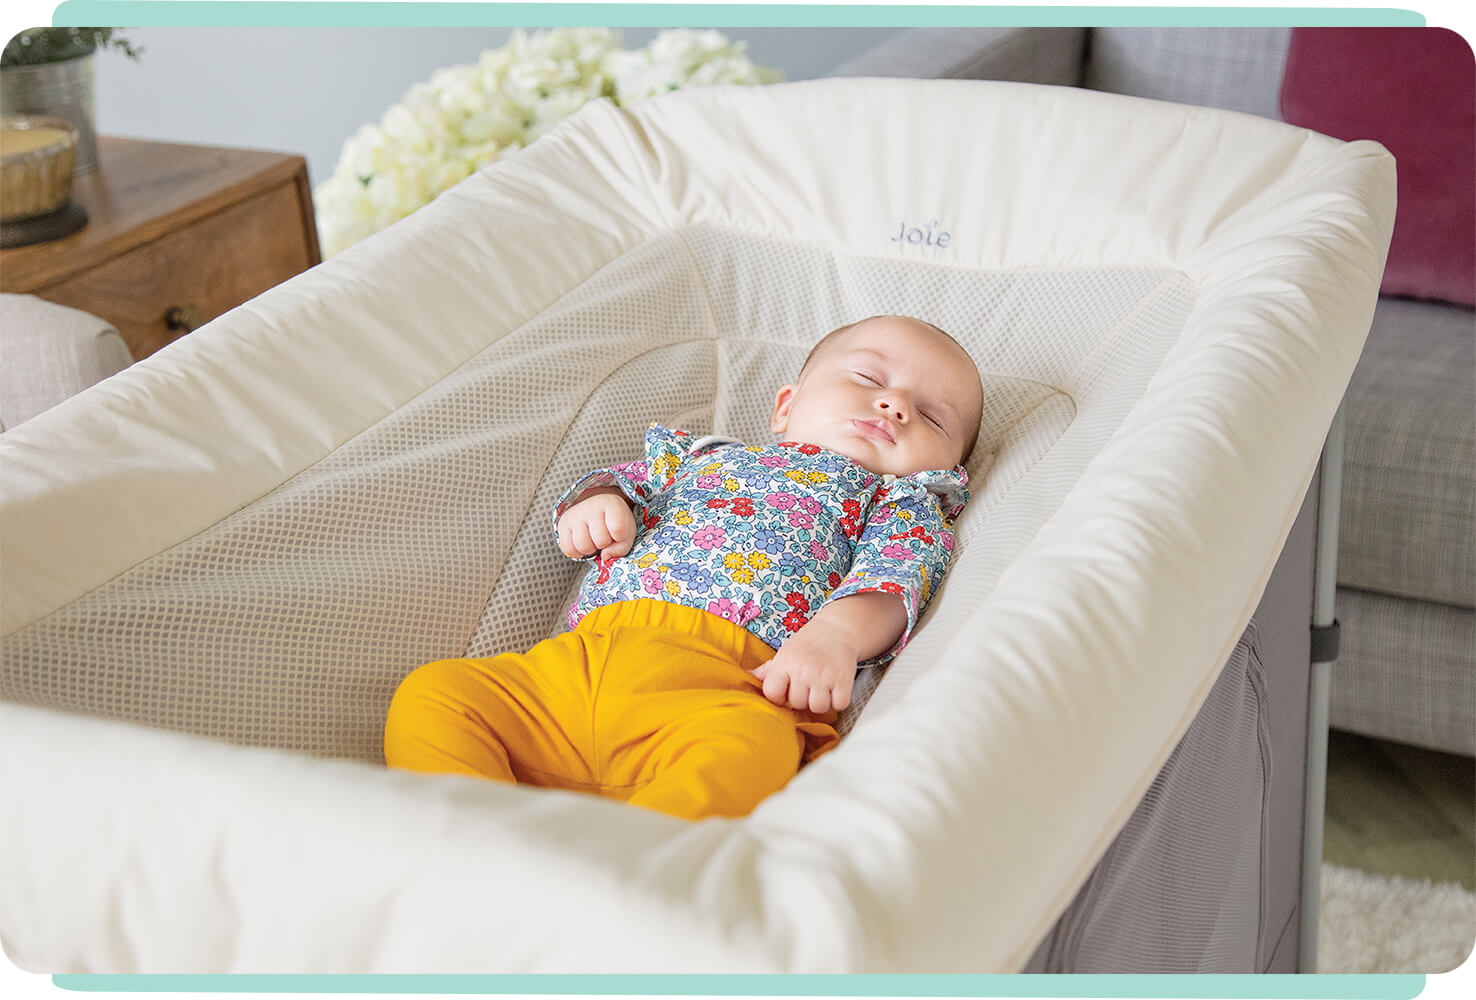 A baby sleeping in a cream colored Joie Daydreamer napping seat